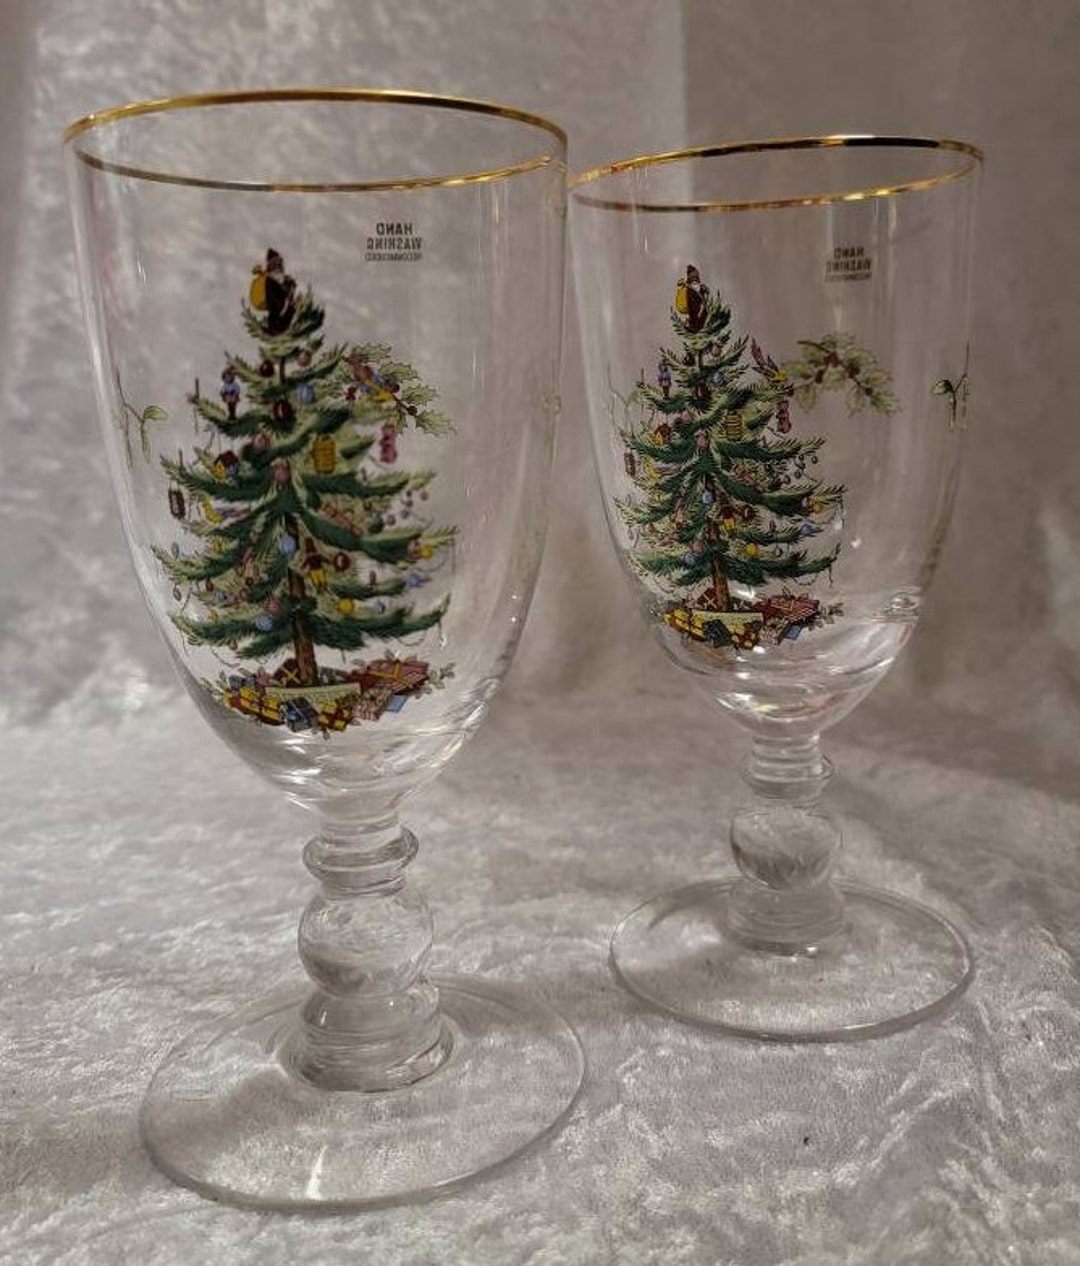 Spode 7 Inch Christmas Tree Wine Glasses Gold Rimmed qty. 3 